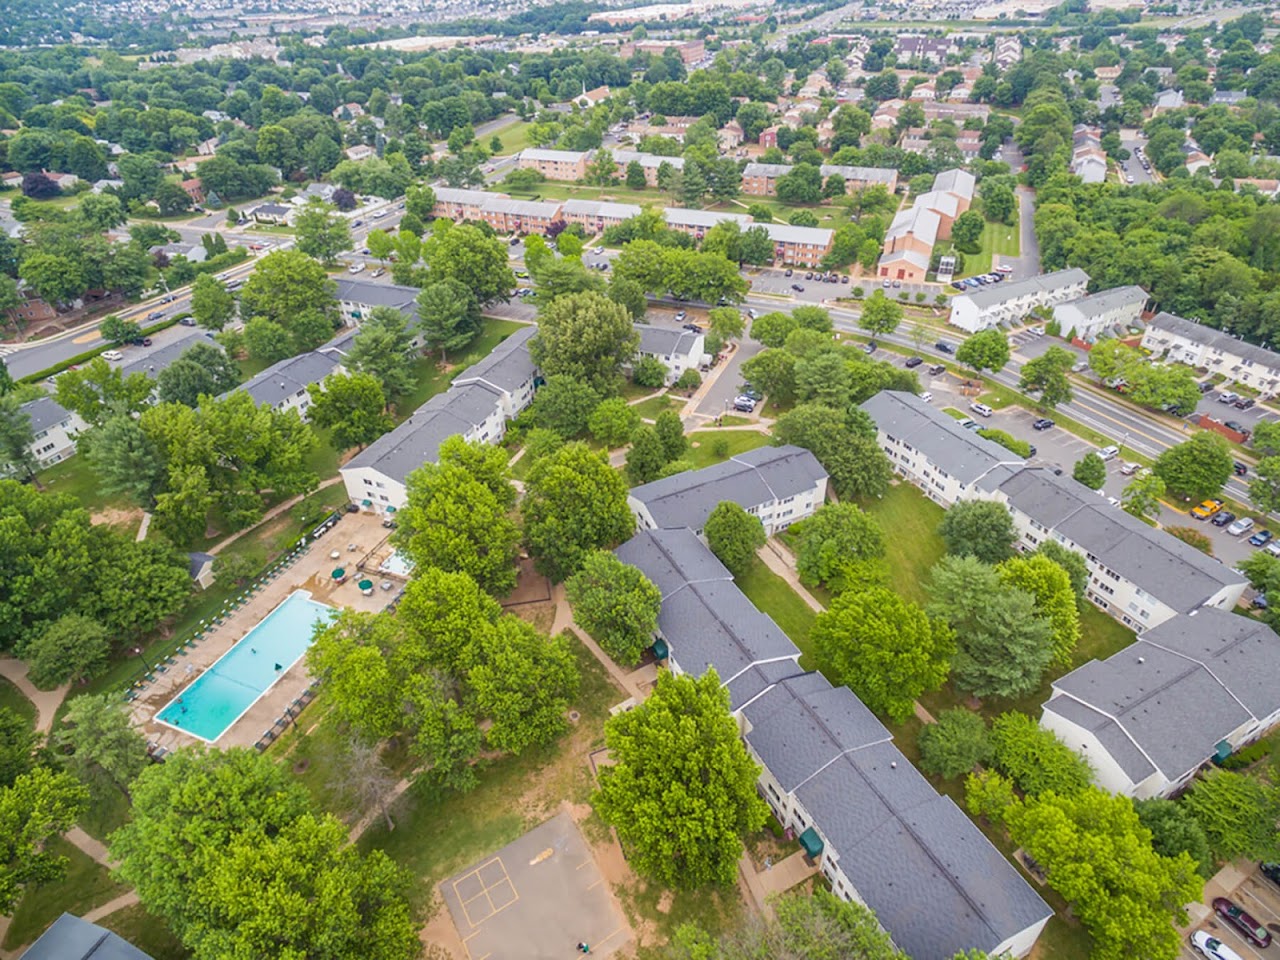 Photo of FIELDS OF LEESBURG I. Affordable housing located at 75 PLAZA ST NE LEESBURG, VA 20176